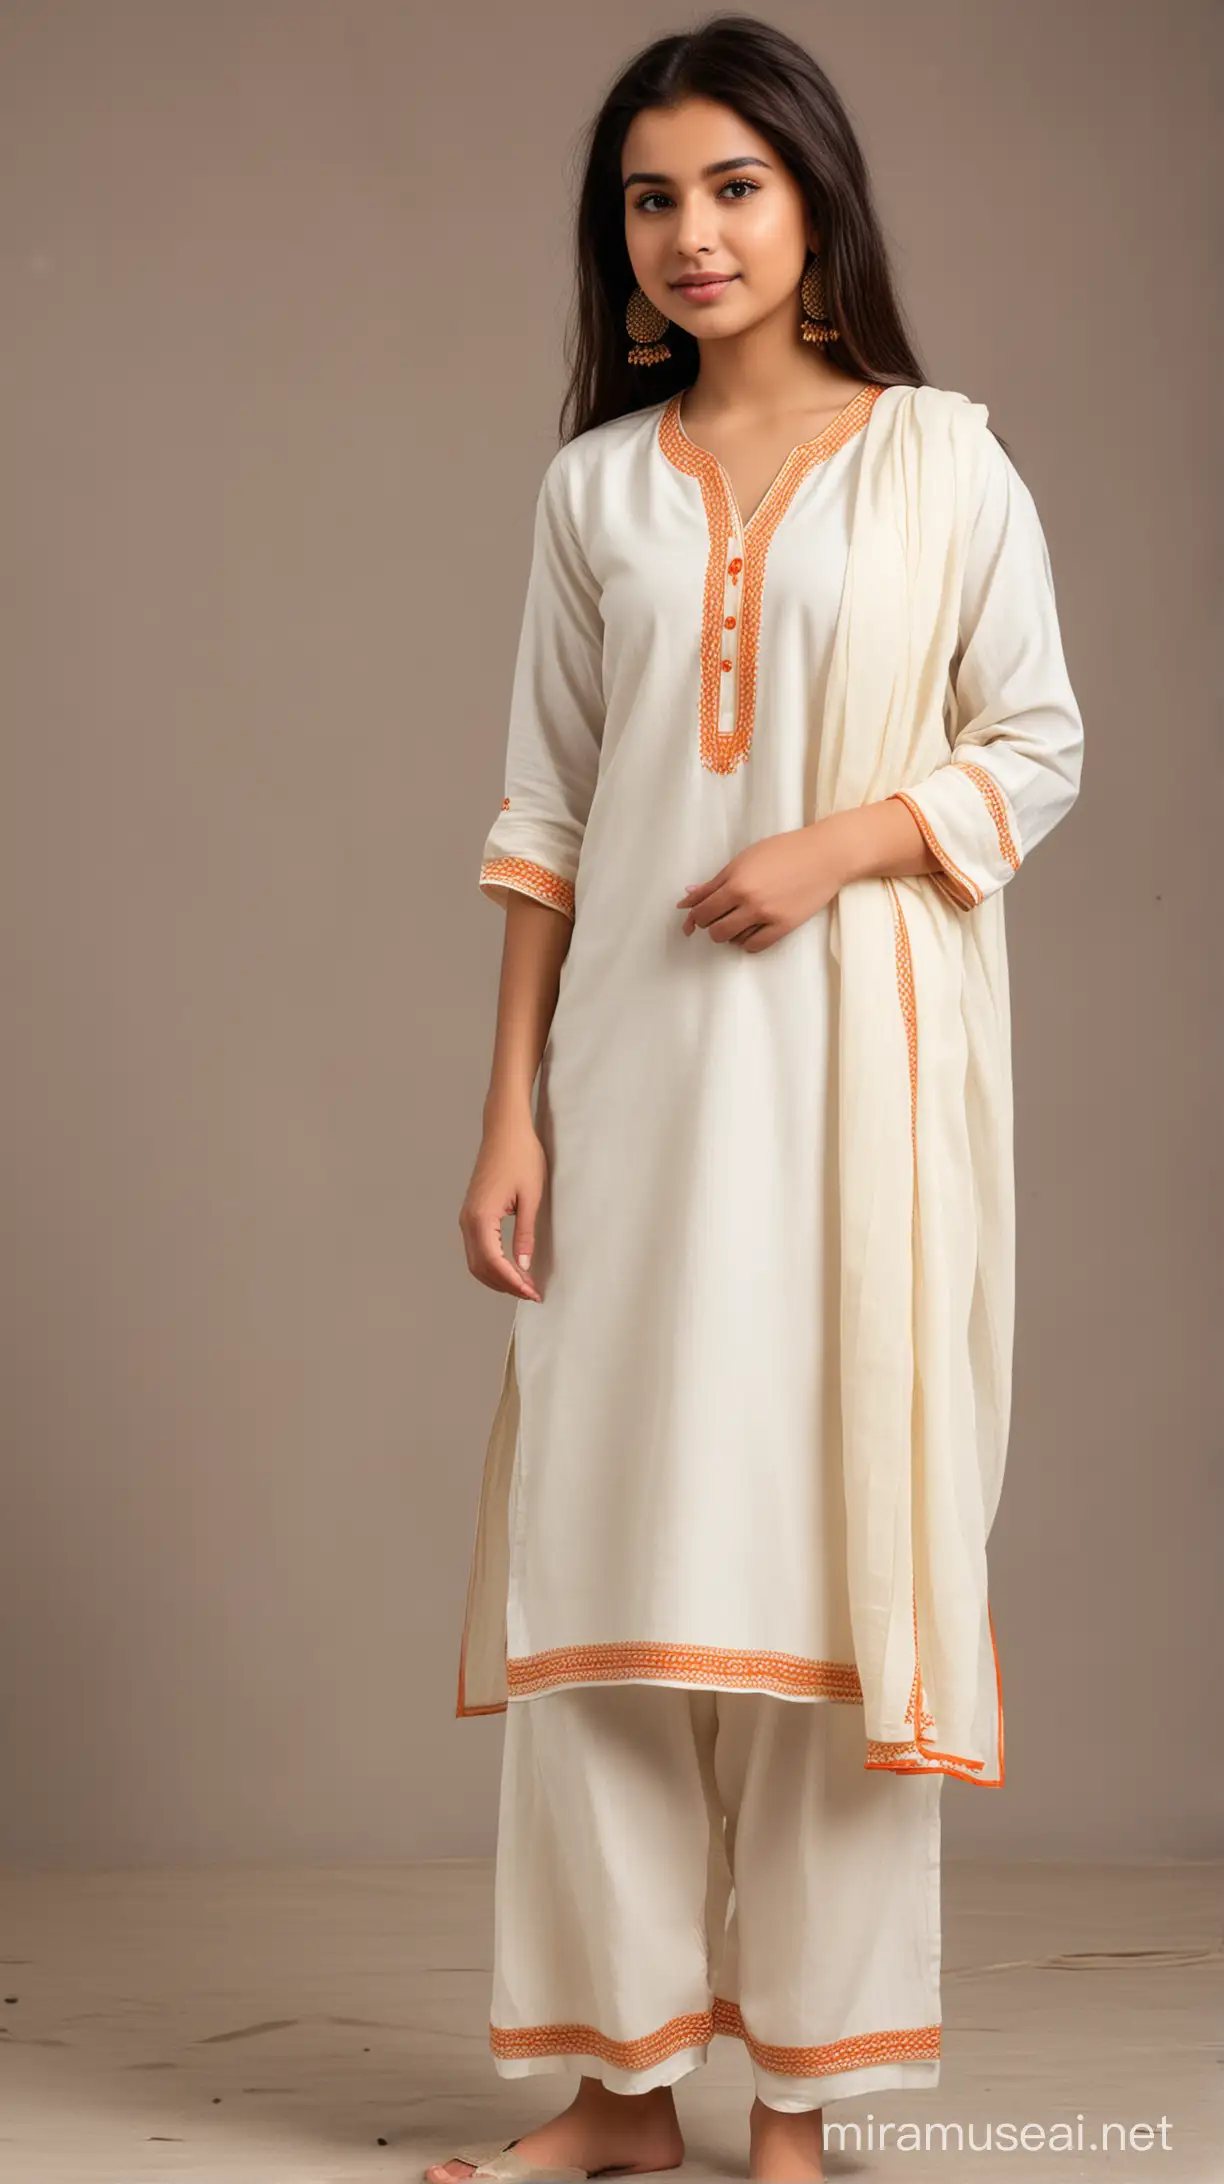 Young Girl in OffWhite Kameez and Shalwar with Orange Piping